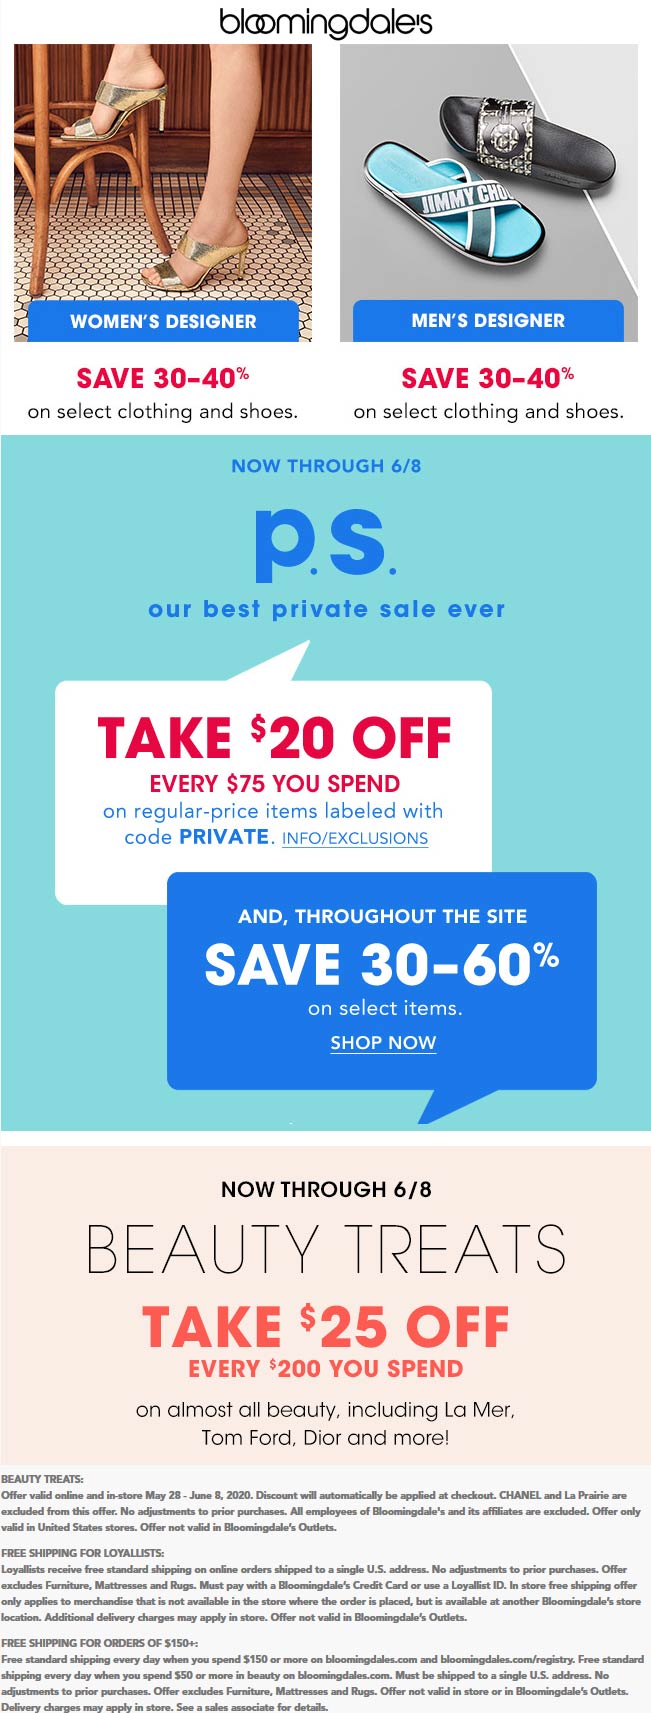 Bloomingdales stores Coupon  $20 off every $75 & more at Bloomingdales via promo code PRIVATE #bloomingdales